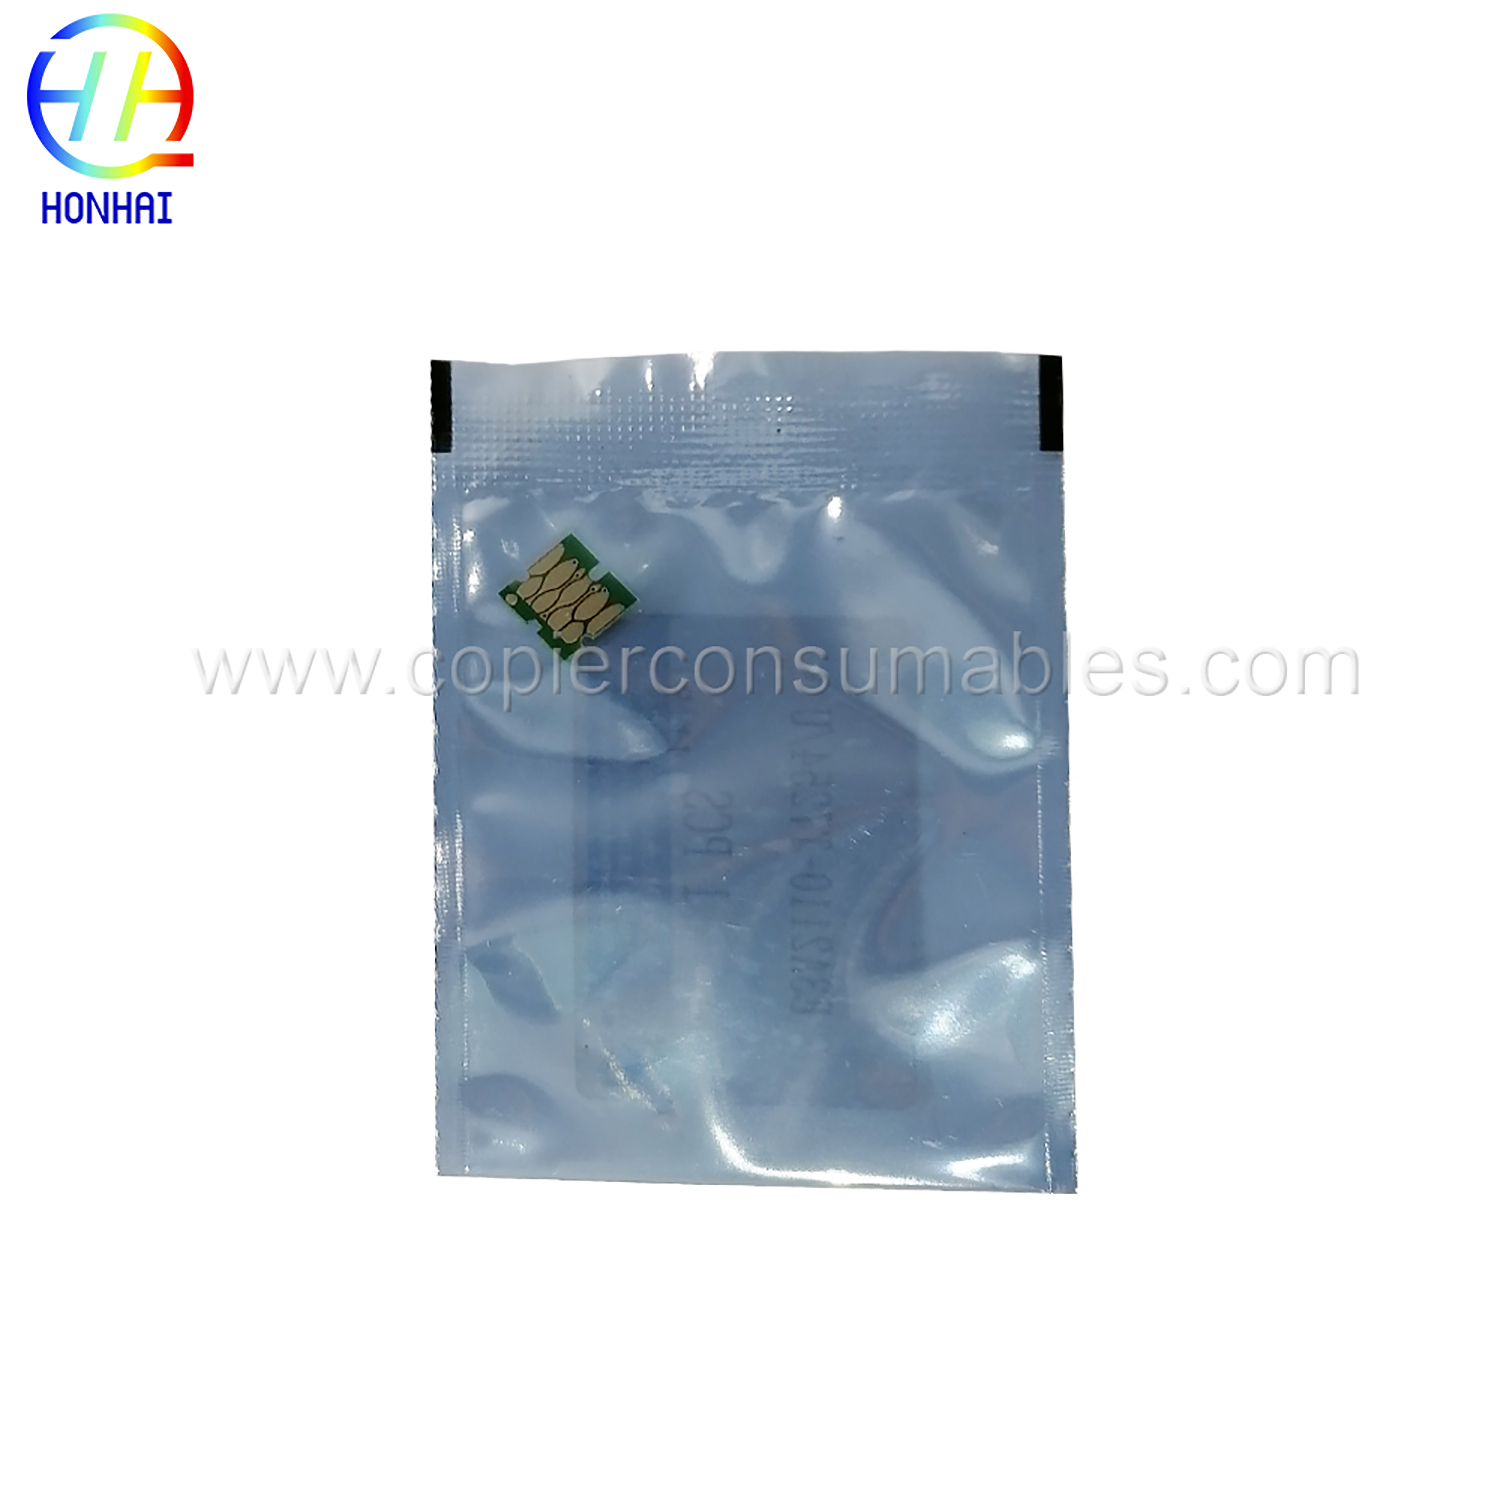 Refillalbe Ink Cartridge Chip for Epson F2000 F2100 F2130